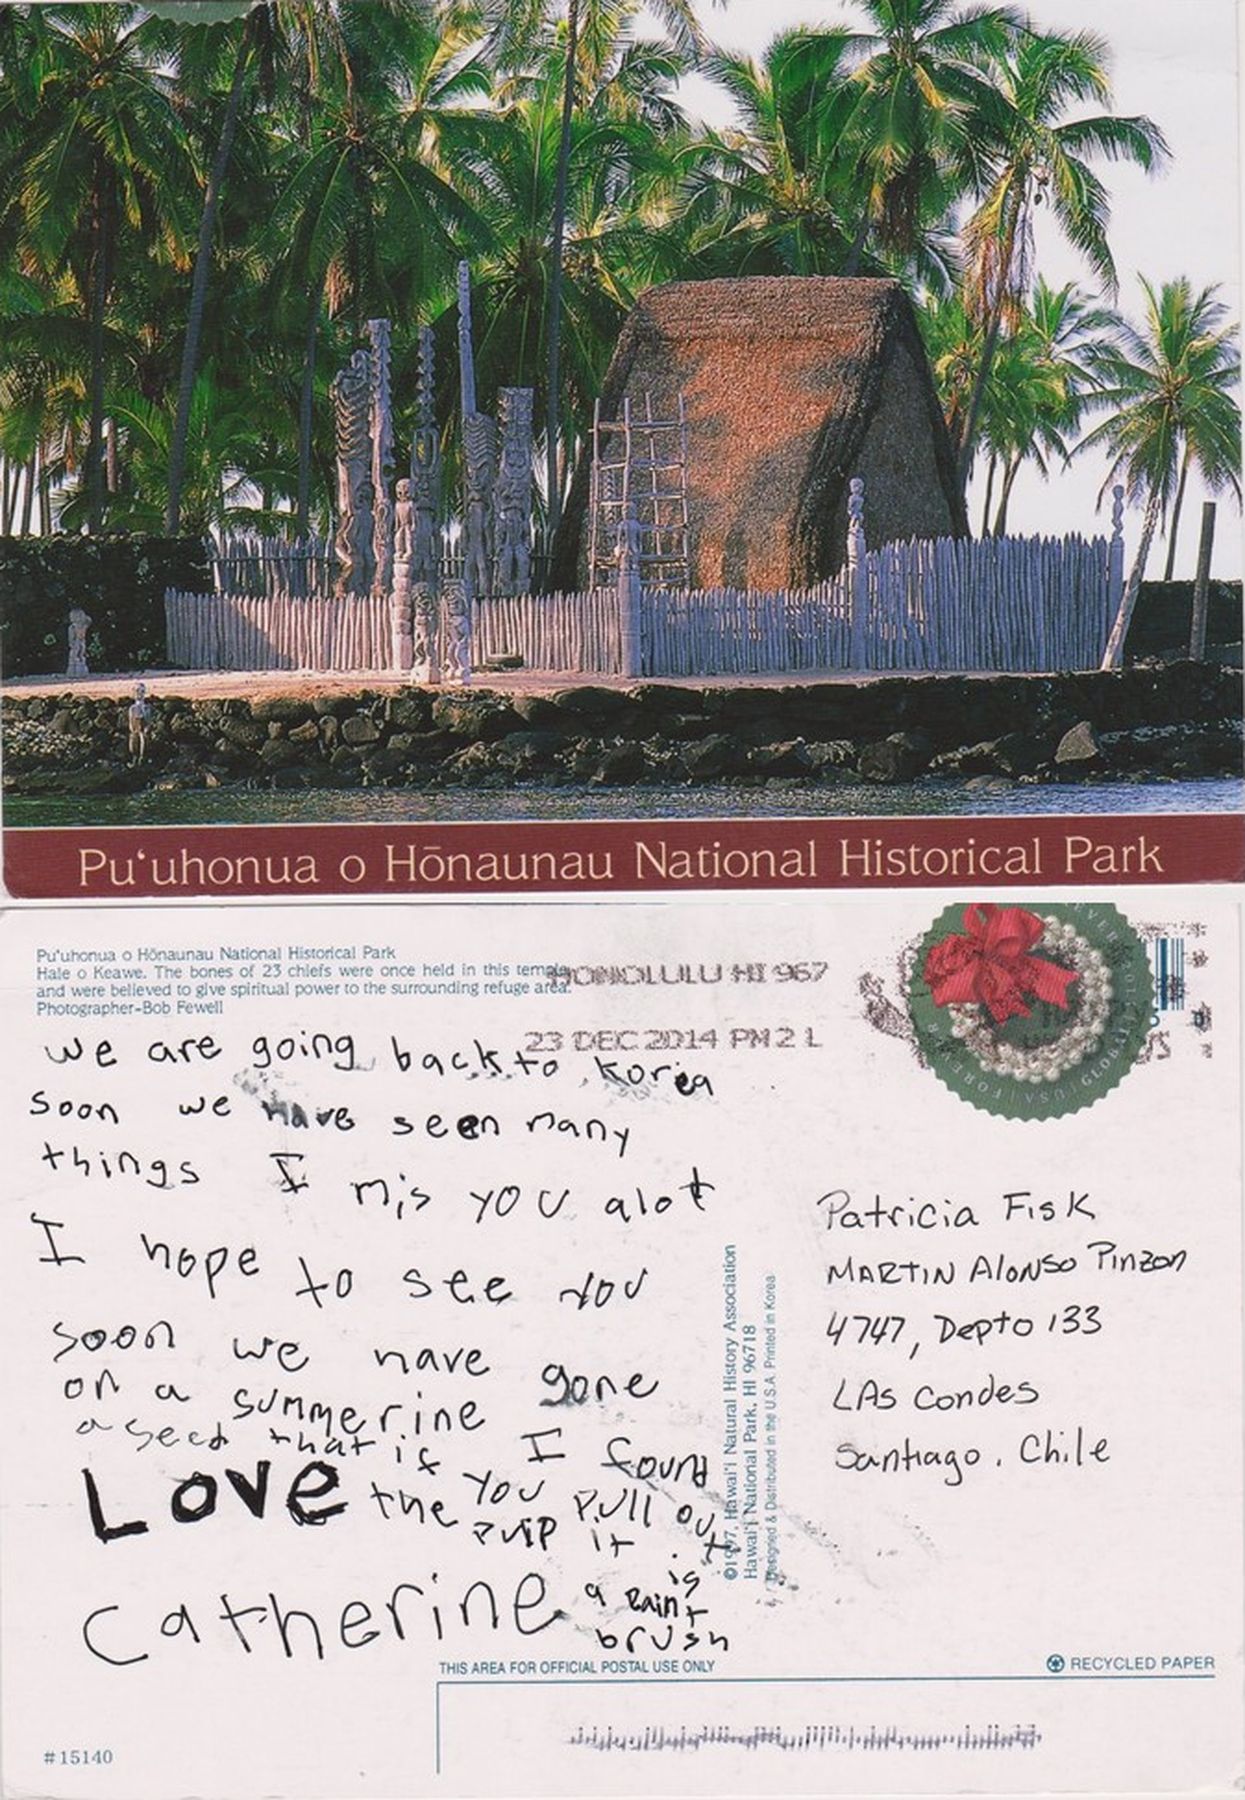 {}{<> Patricia Rosa Oliva Guerra};{[|] Post Cards from Grandchildren};{Catherine};{Post Card from my Grandchildren};{Pu uhonua National Park};{eTg};{Korea};{SIC Catherine};{National Park};{Hawaii};{Kirkwood};{Australia};{@Place=Honolulu};{ Hawaii};{@Date=Dec 2014};{@Author=Clarence Fisk ll};{[ATHR]Clarence Fisk ll